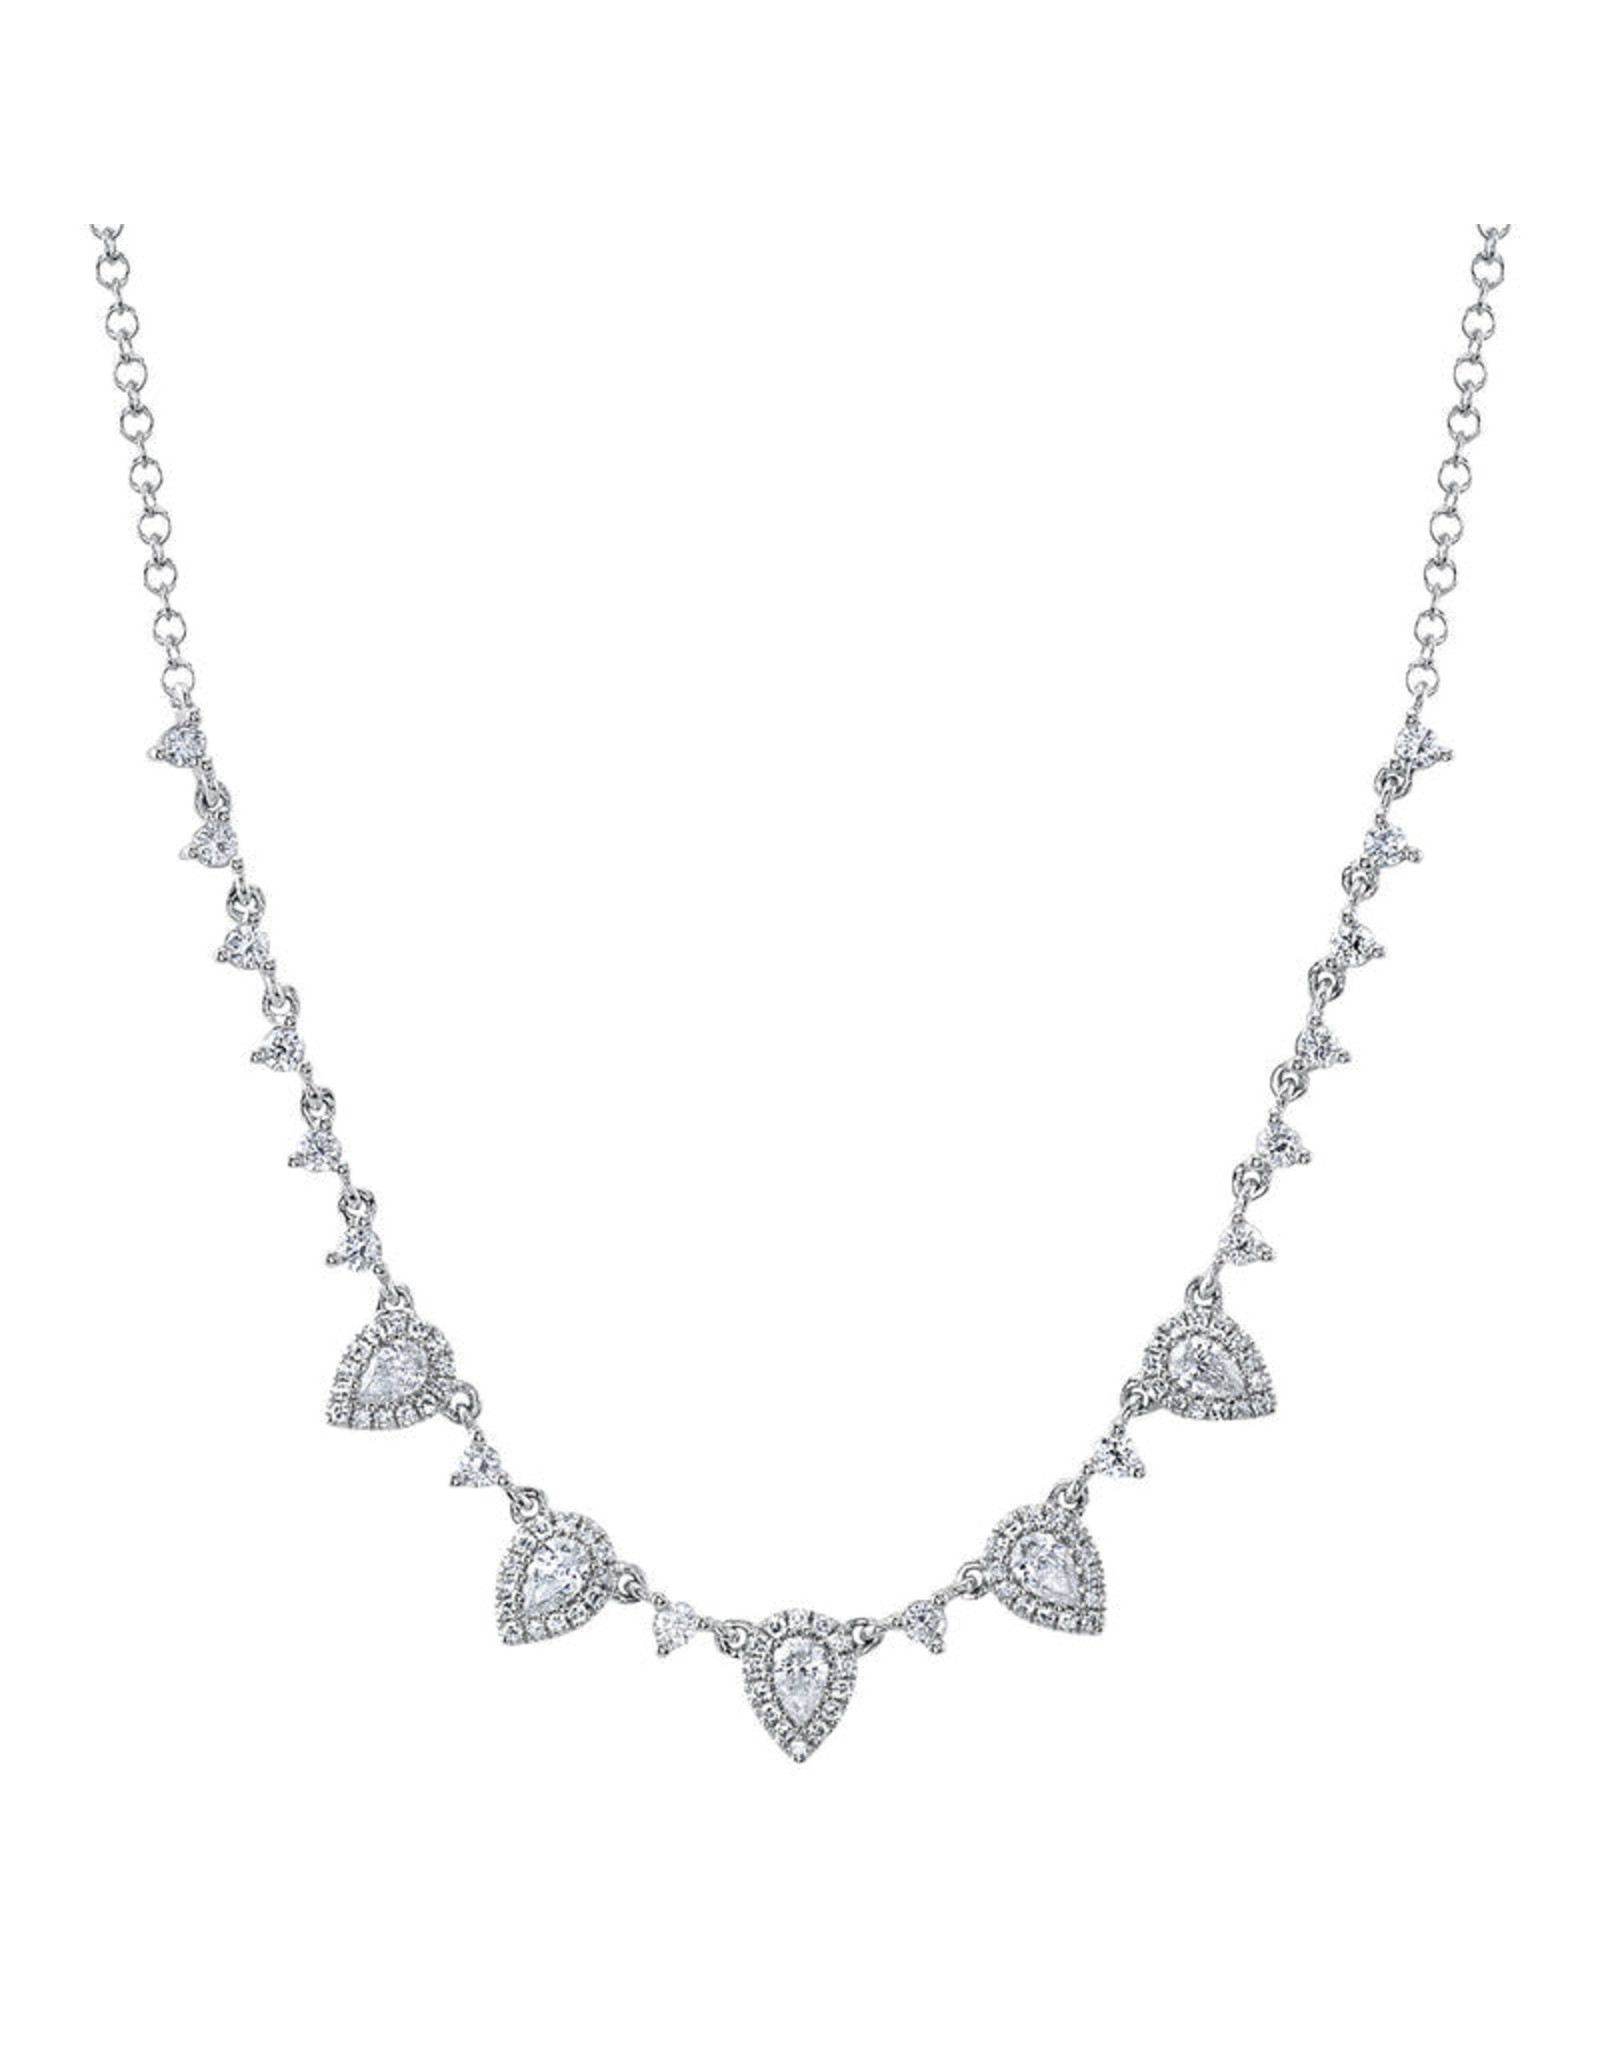 14K White Gold Diamond Pear Layering Necklace, D: 0.87ct